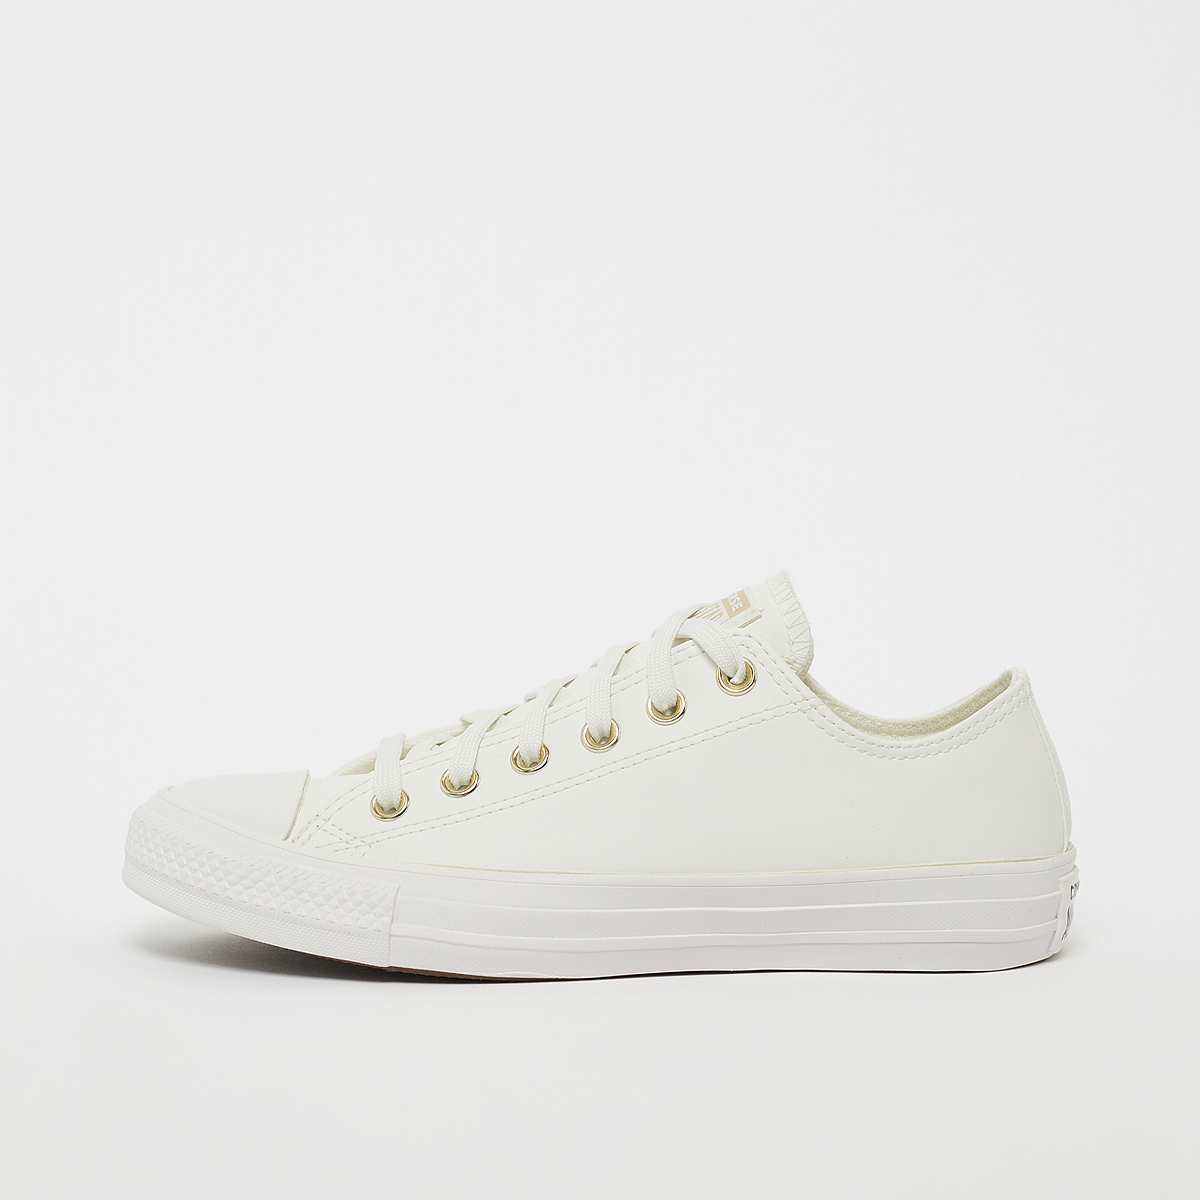 Chuck Taylor All Star, Converse, Footwear, vintage white/vintage white ox, taille: 37.5